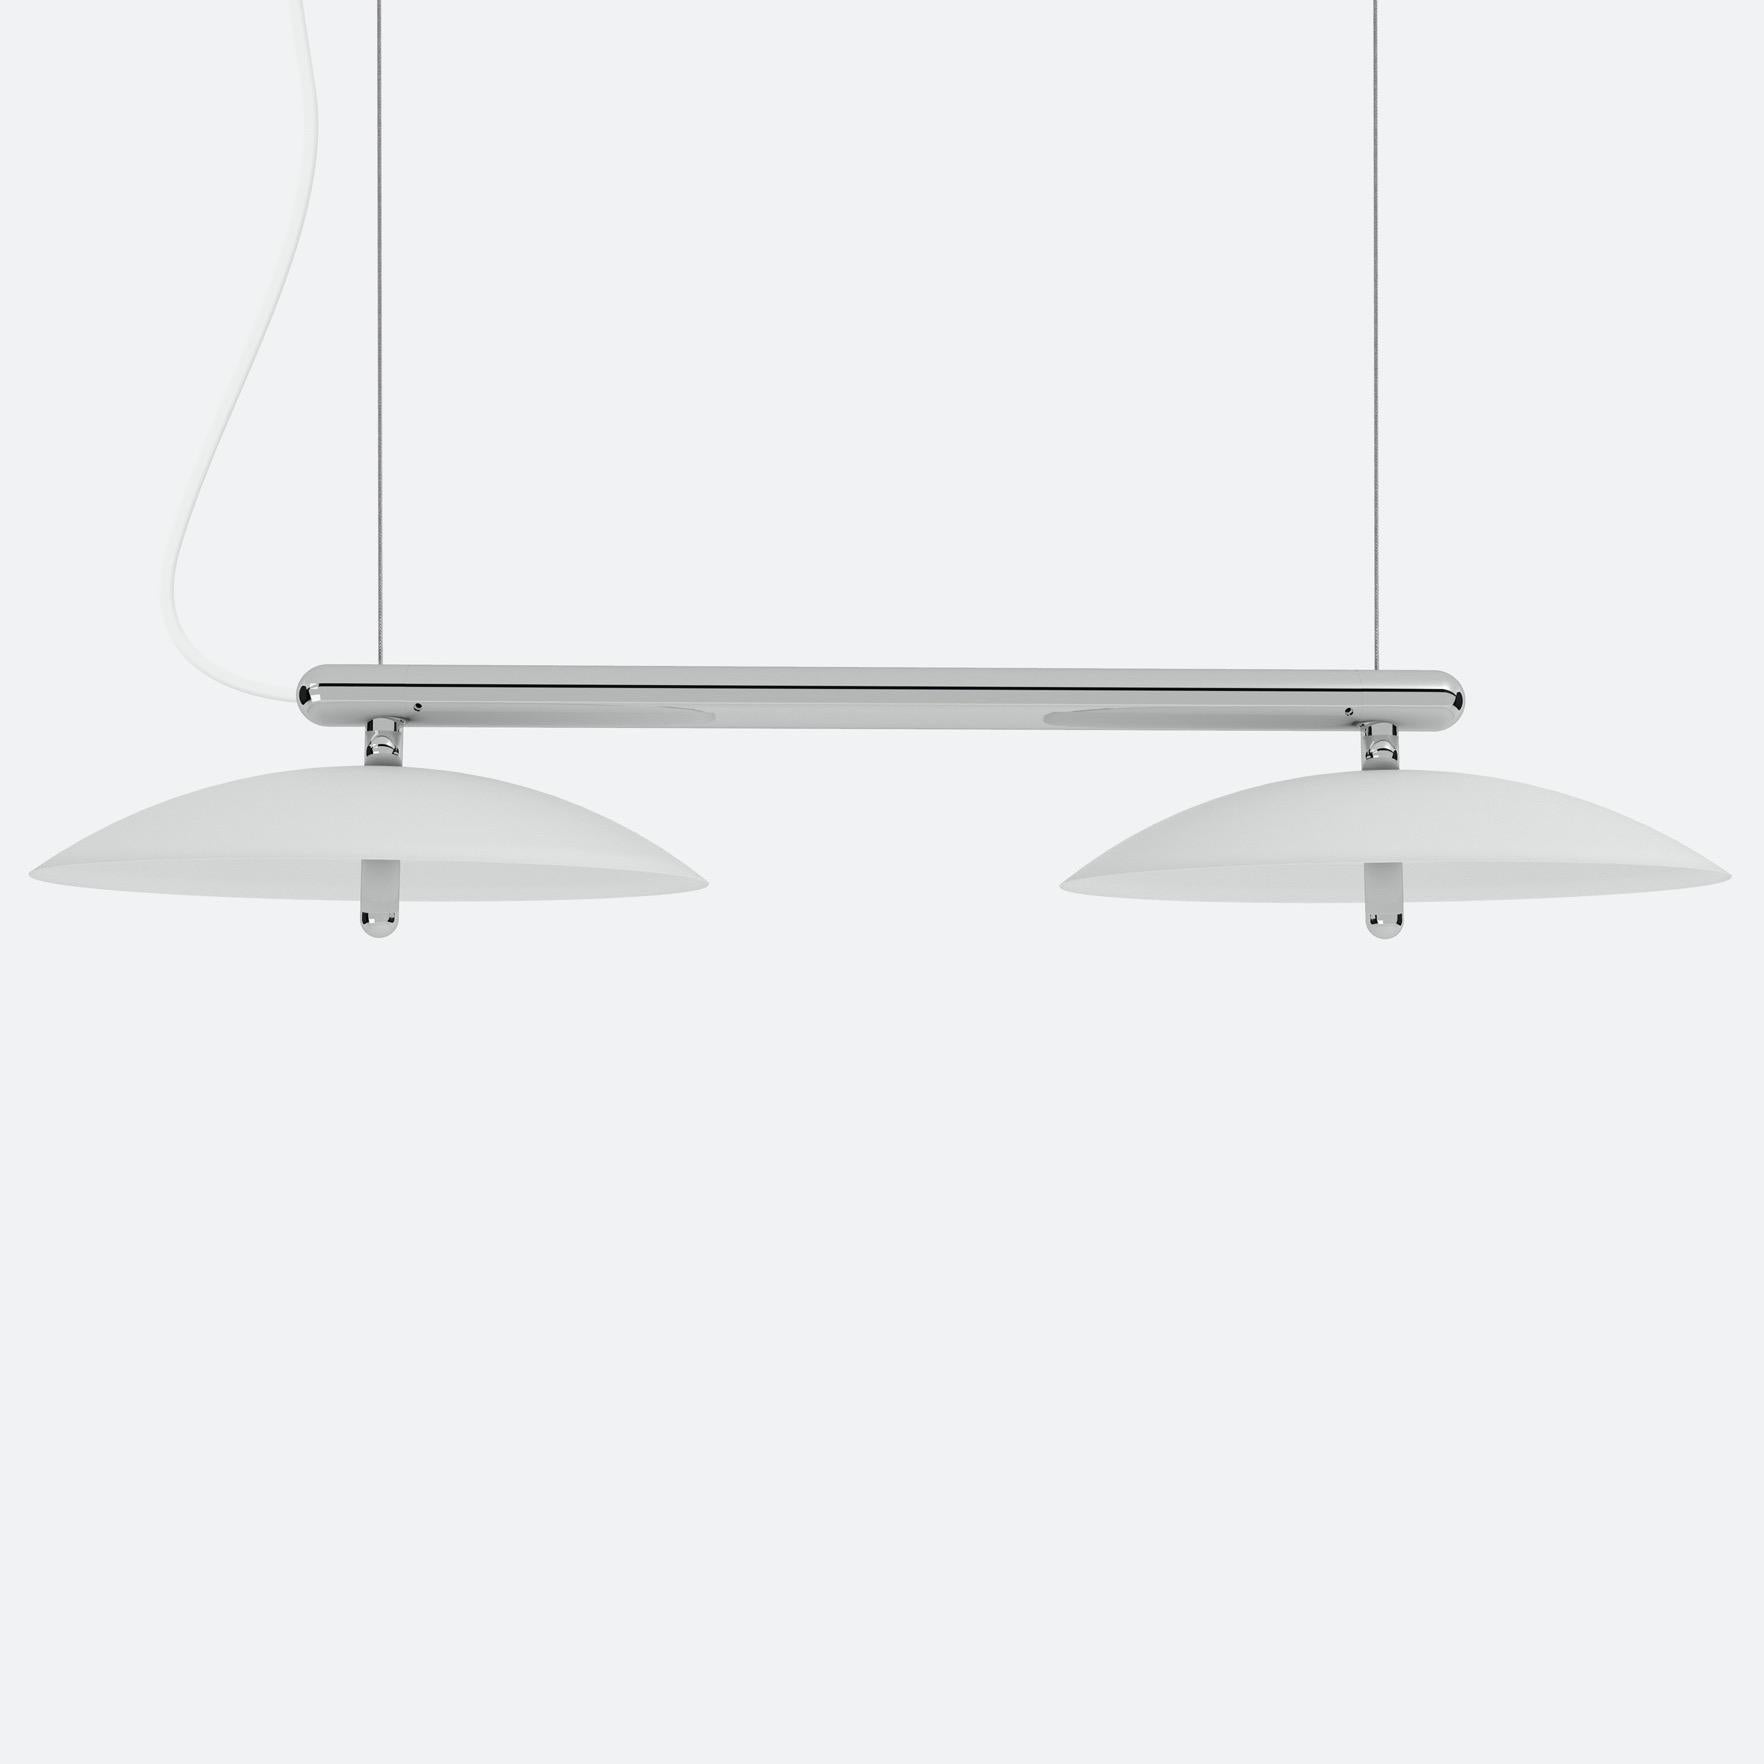 Price is for a signal linear pendant with white shades and nickel accents. This piece is customizable so we can also make the finishes per order to your spec. 

Lamping: G8 LED Bulbs (included)
Canopy: White, 5in Diameter, .25in height
4x G8 LED